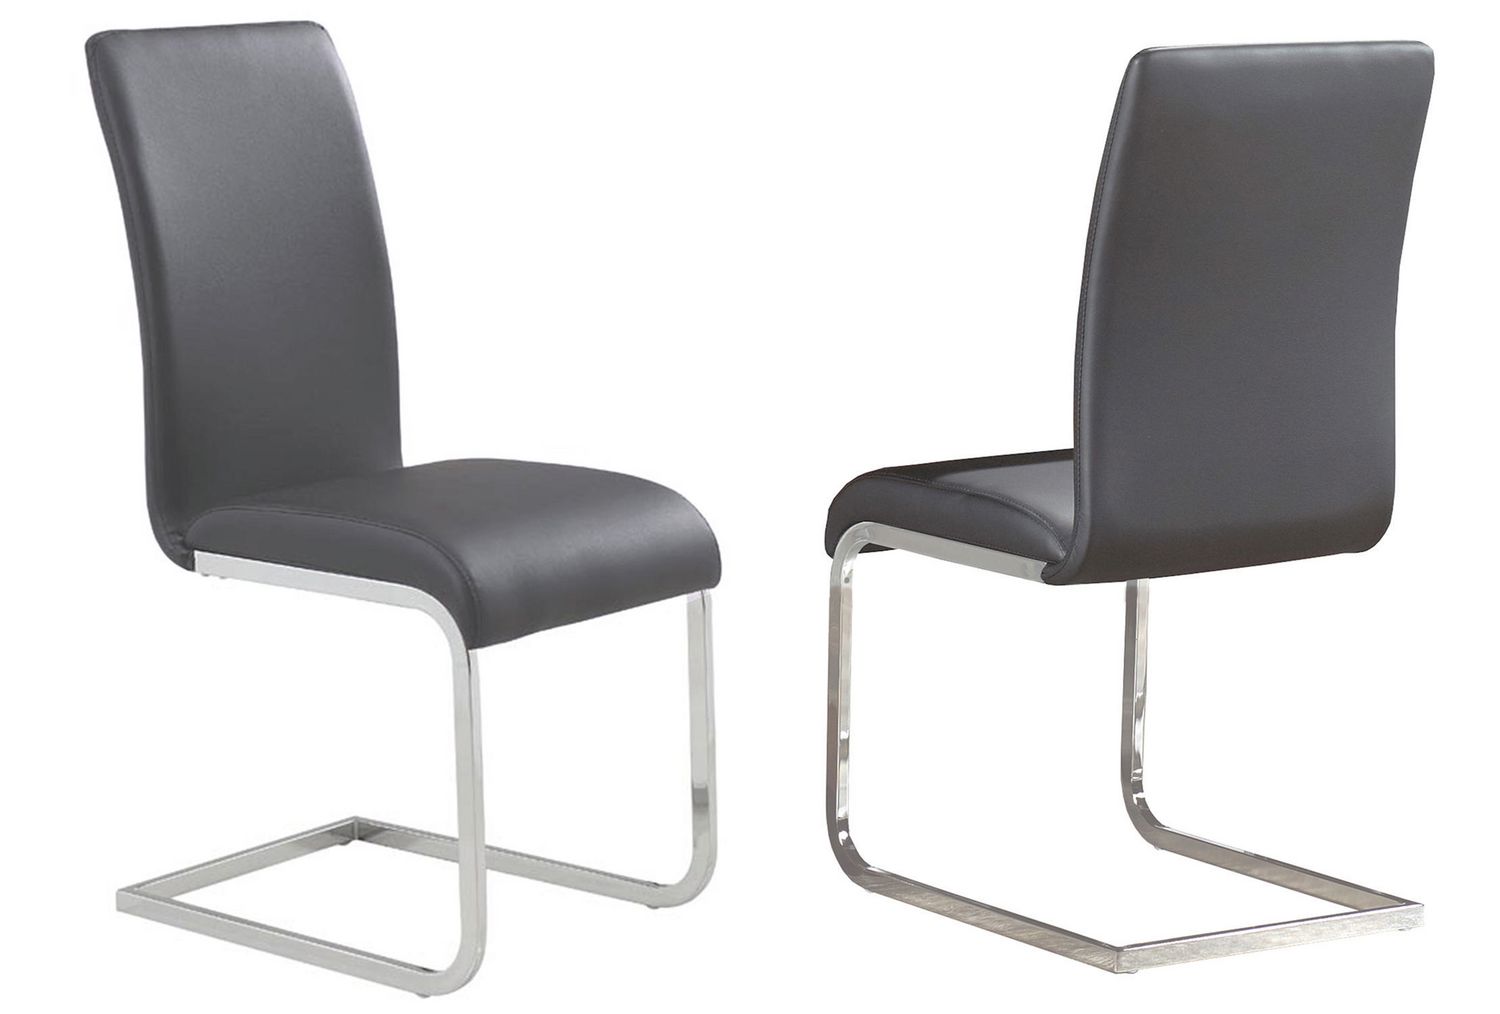 Set Of 2 Faux Leather Dining Chair In, Leather Kitchen Chairs Canada